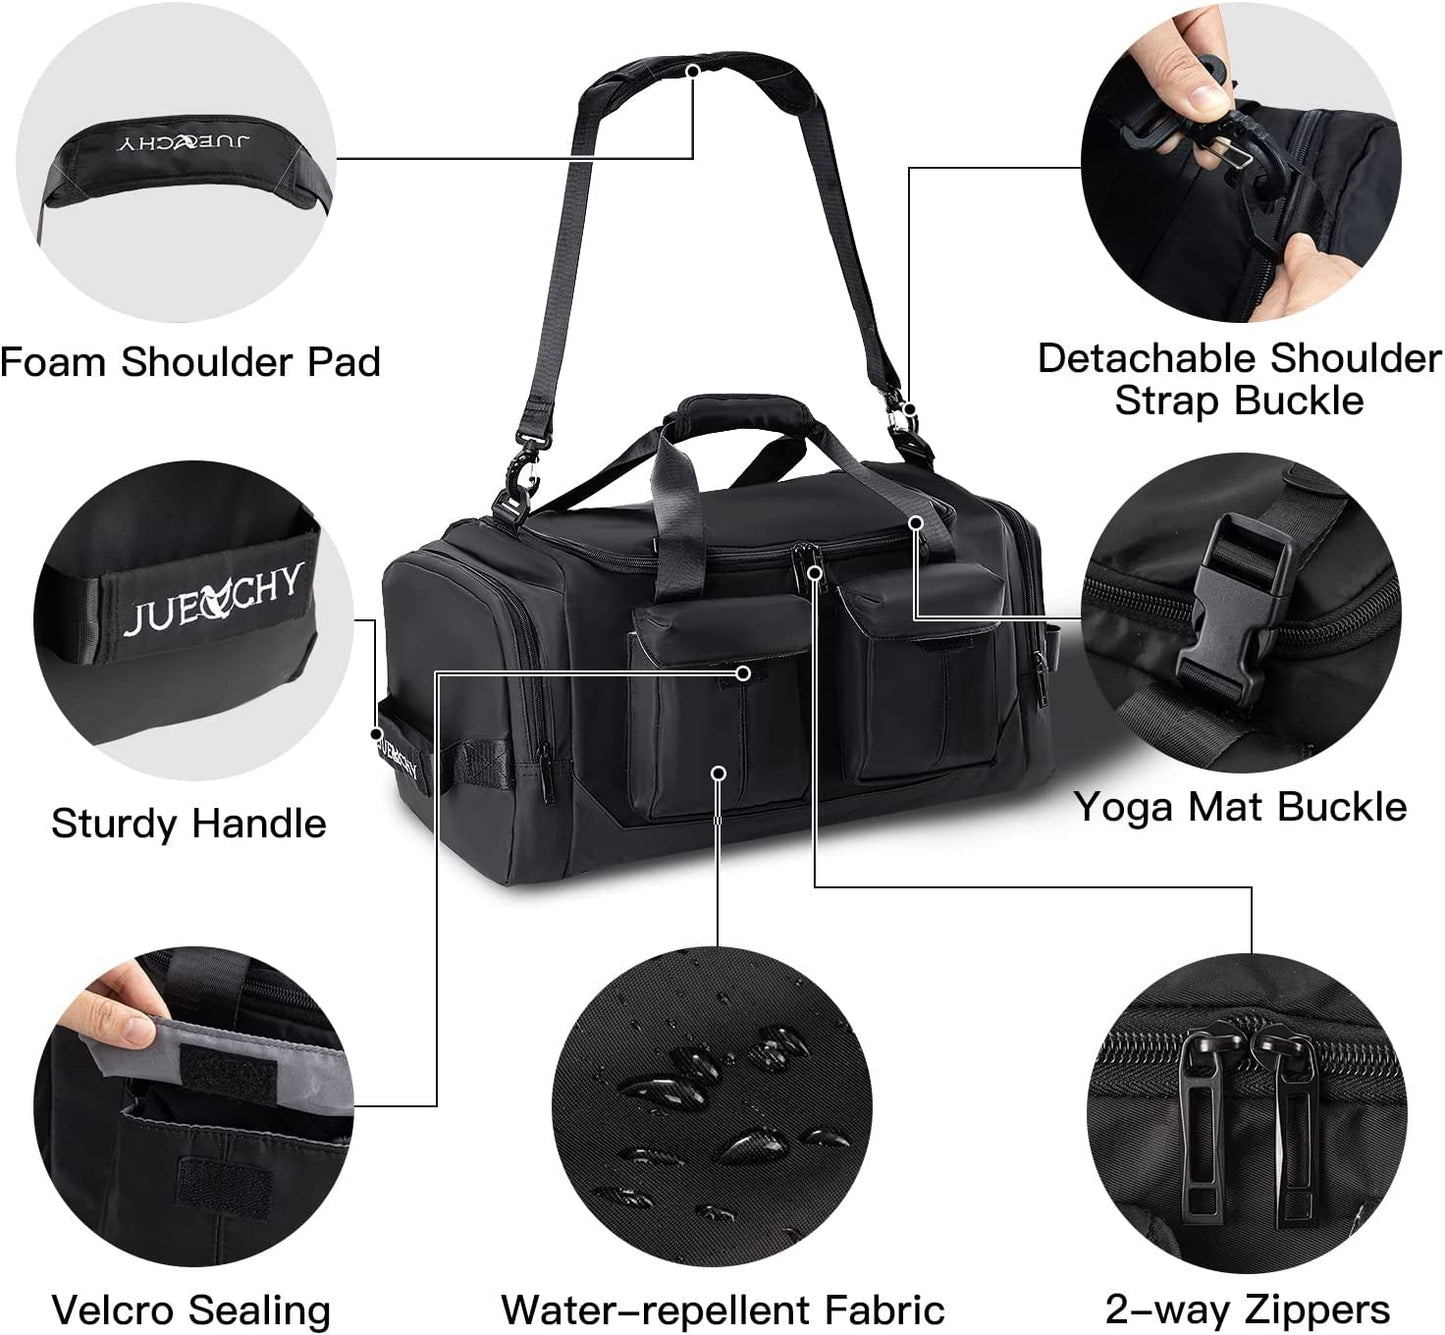 Jueachy Gym Bag for Men Small Gym Bag for Women Workout Duffle Bag Luggage Weekend Travel Backpack with Shoe Compartment Waterproof